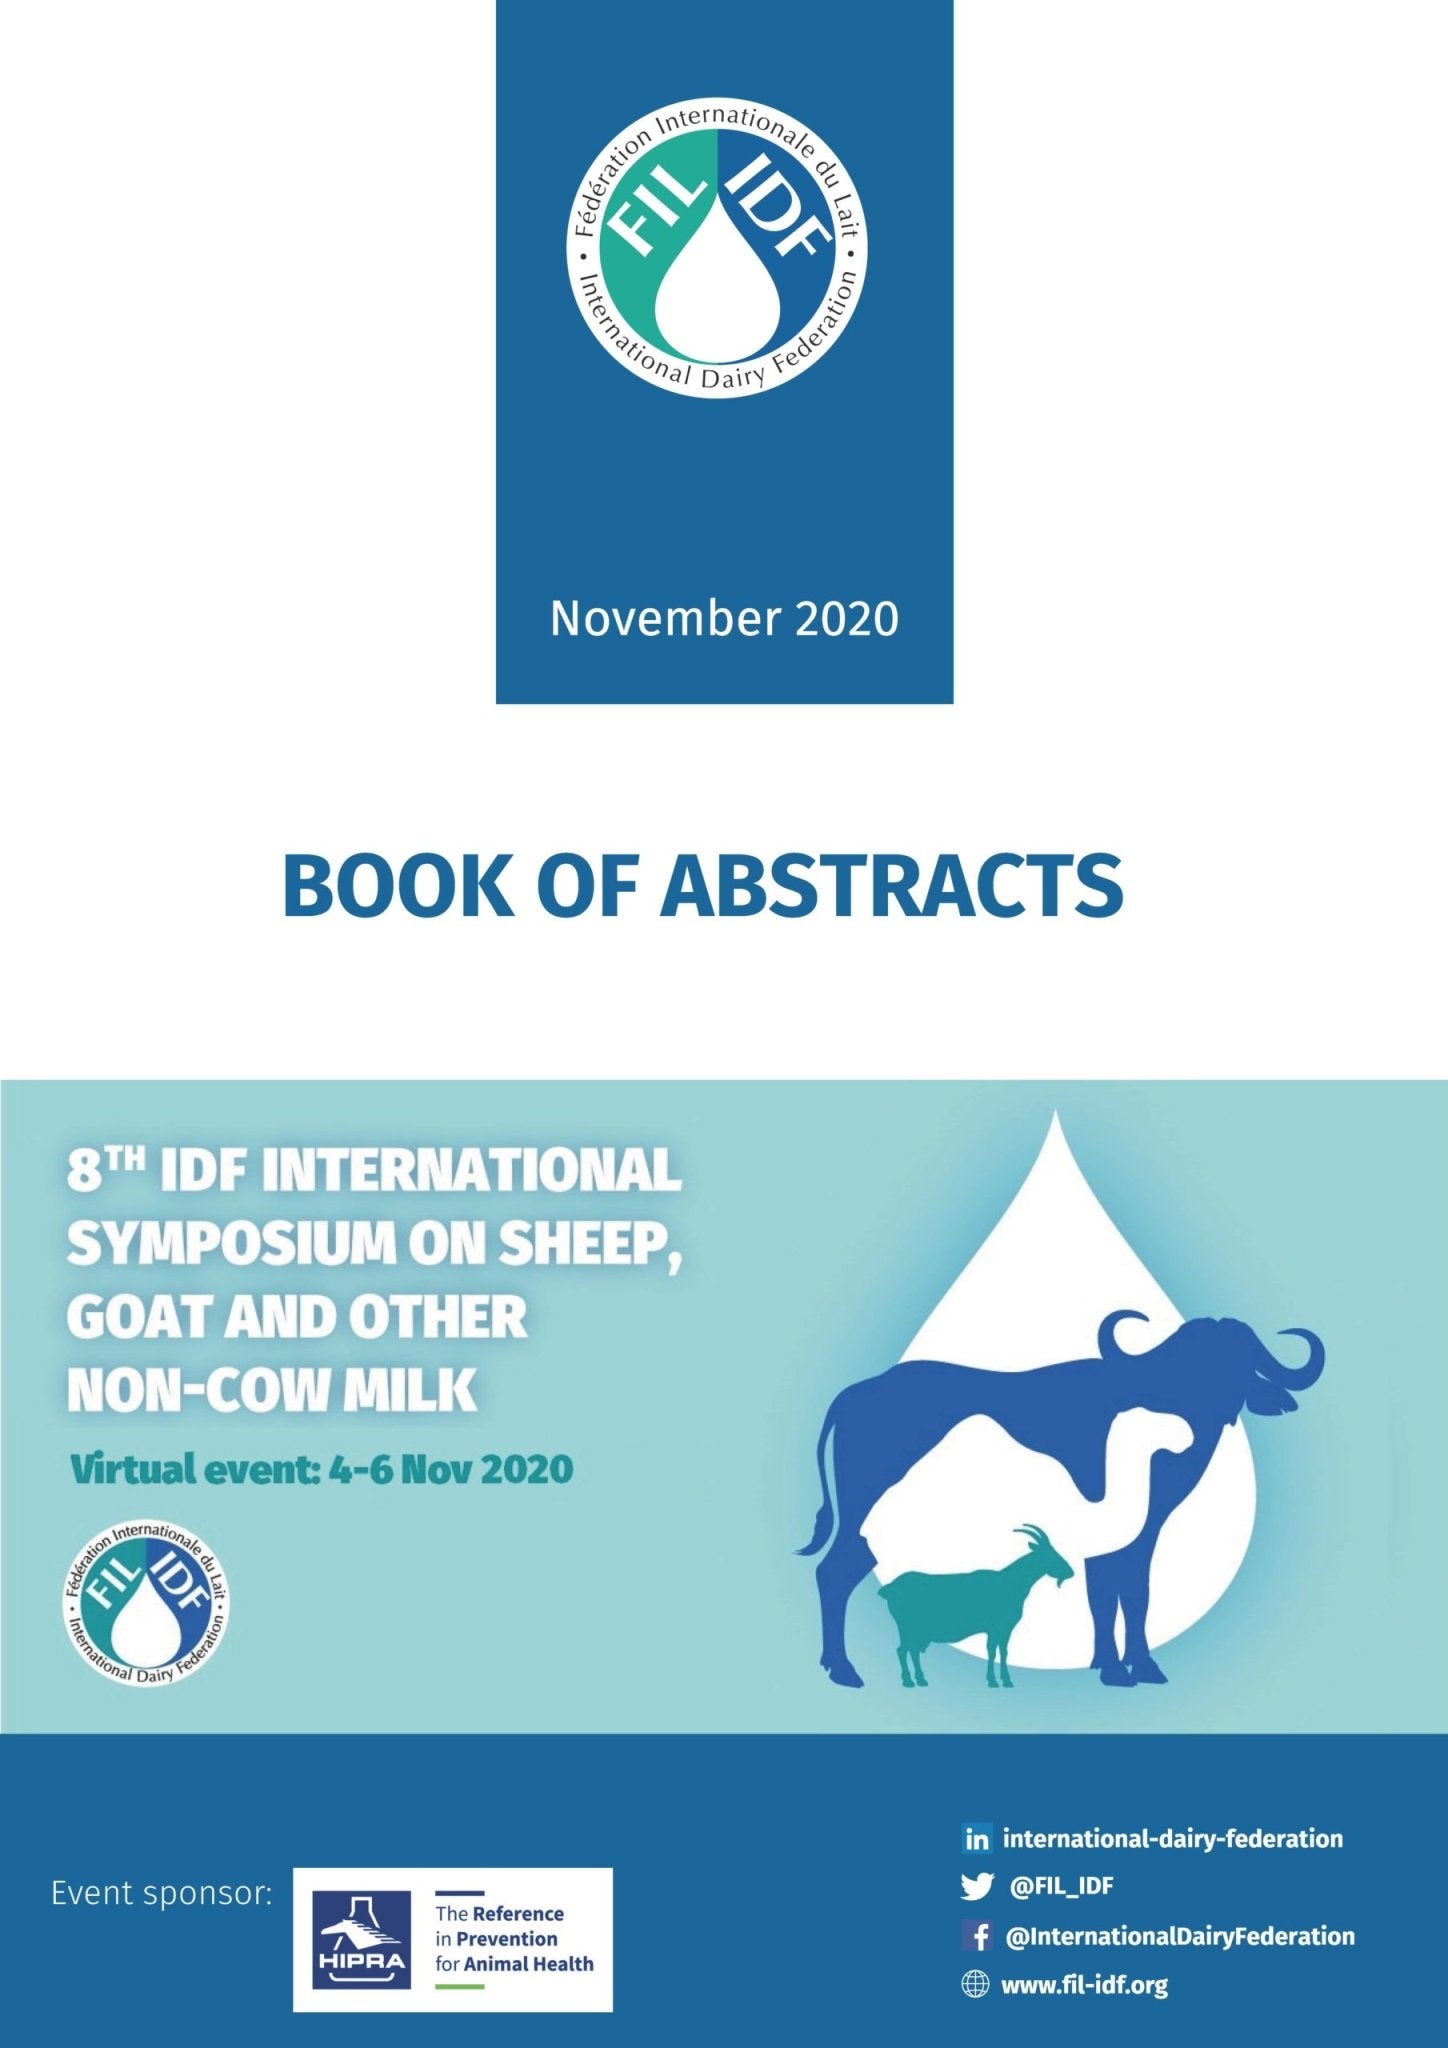 Book of abstracts: 8th IDF international symposium on sheep, goat & other non-cow milk - FIL-IDF